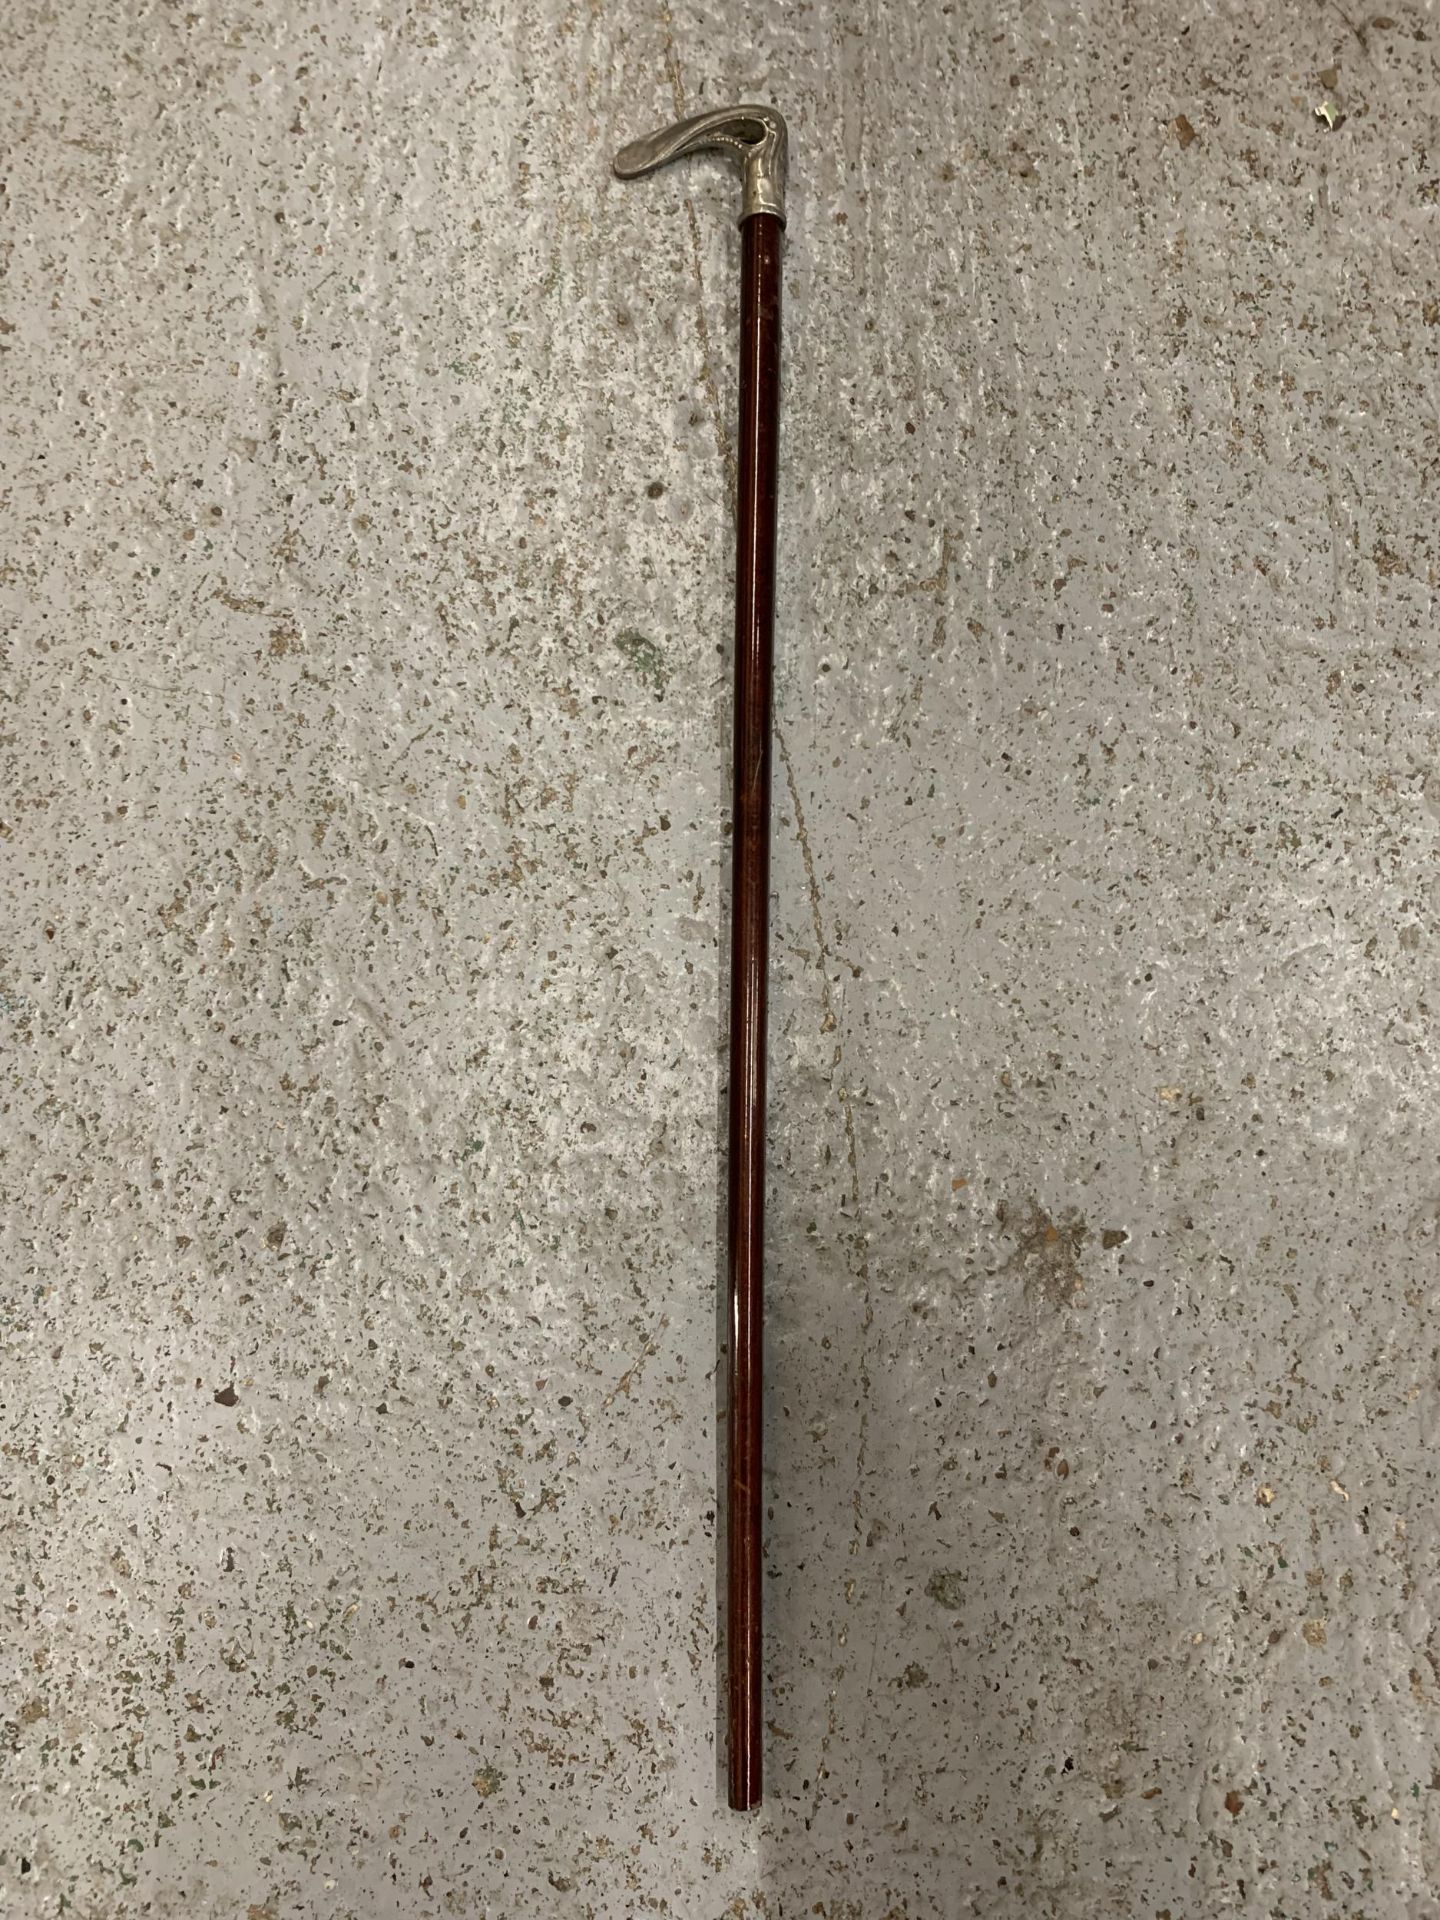 A VINTAGE WALKING STICK WITH A DECORATIVE WHITE METAL HANDLE